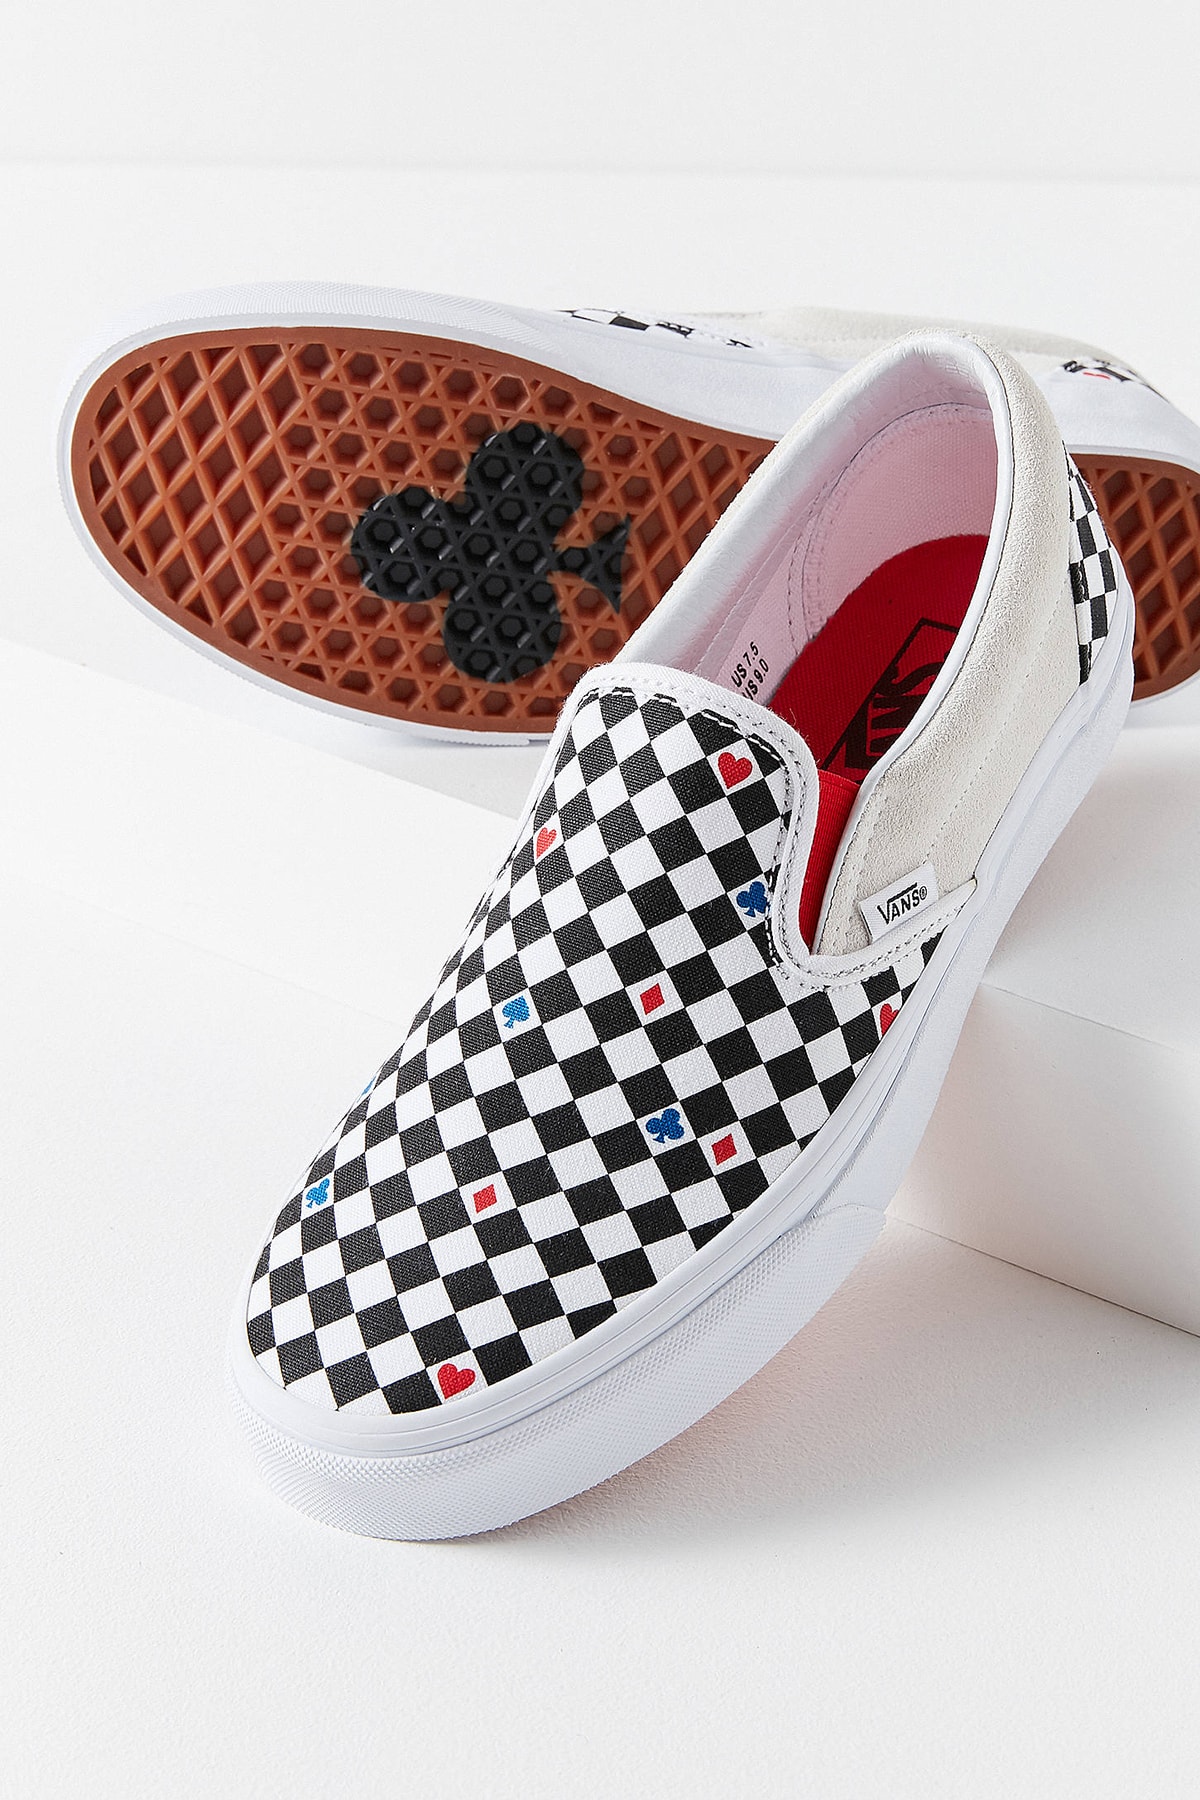 Vans Urban Outfitters Slip On Playing Cards Heart Red White Black Checkerboard